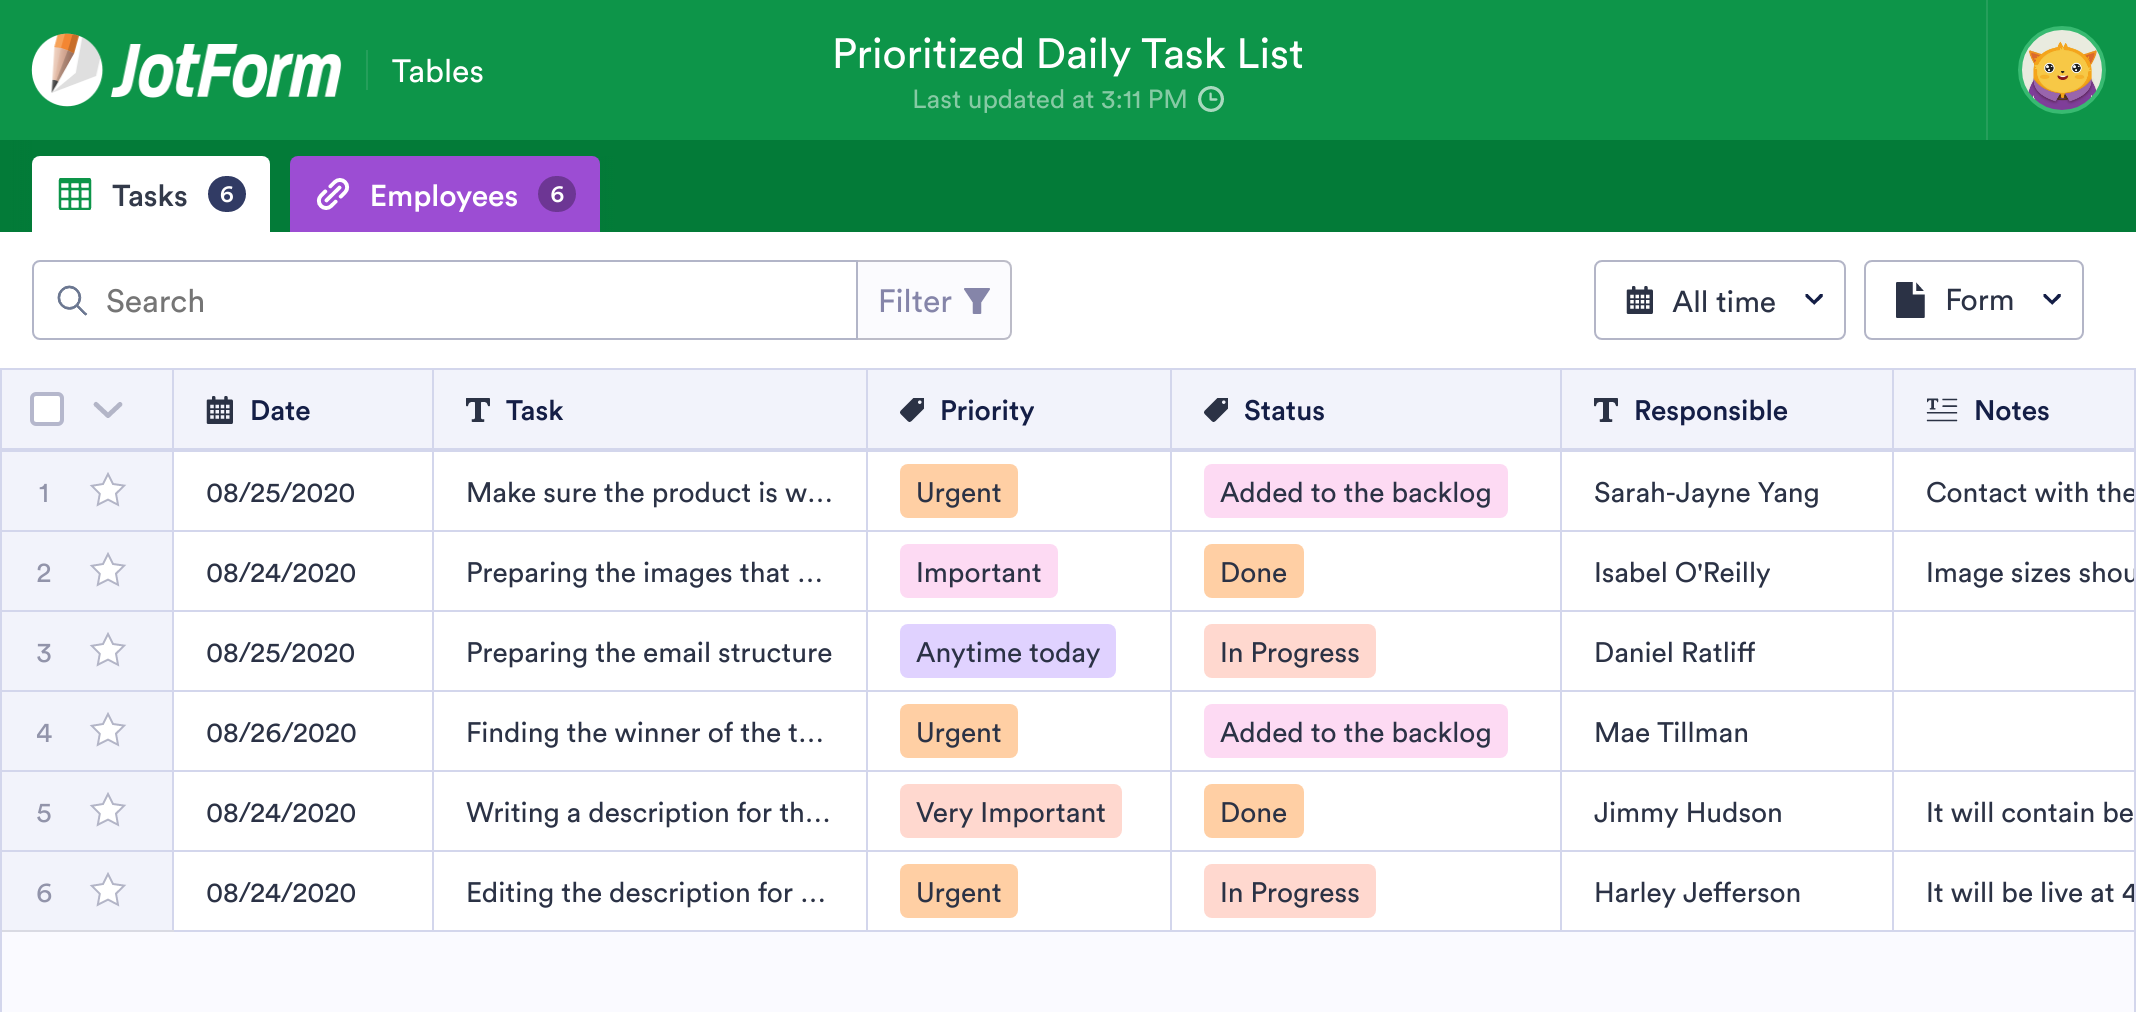 prioritized-daily-task-list-template-jotform-tables